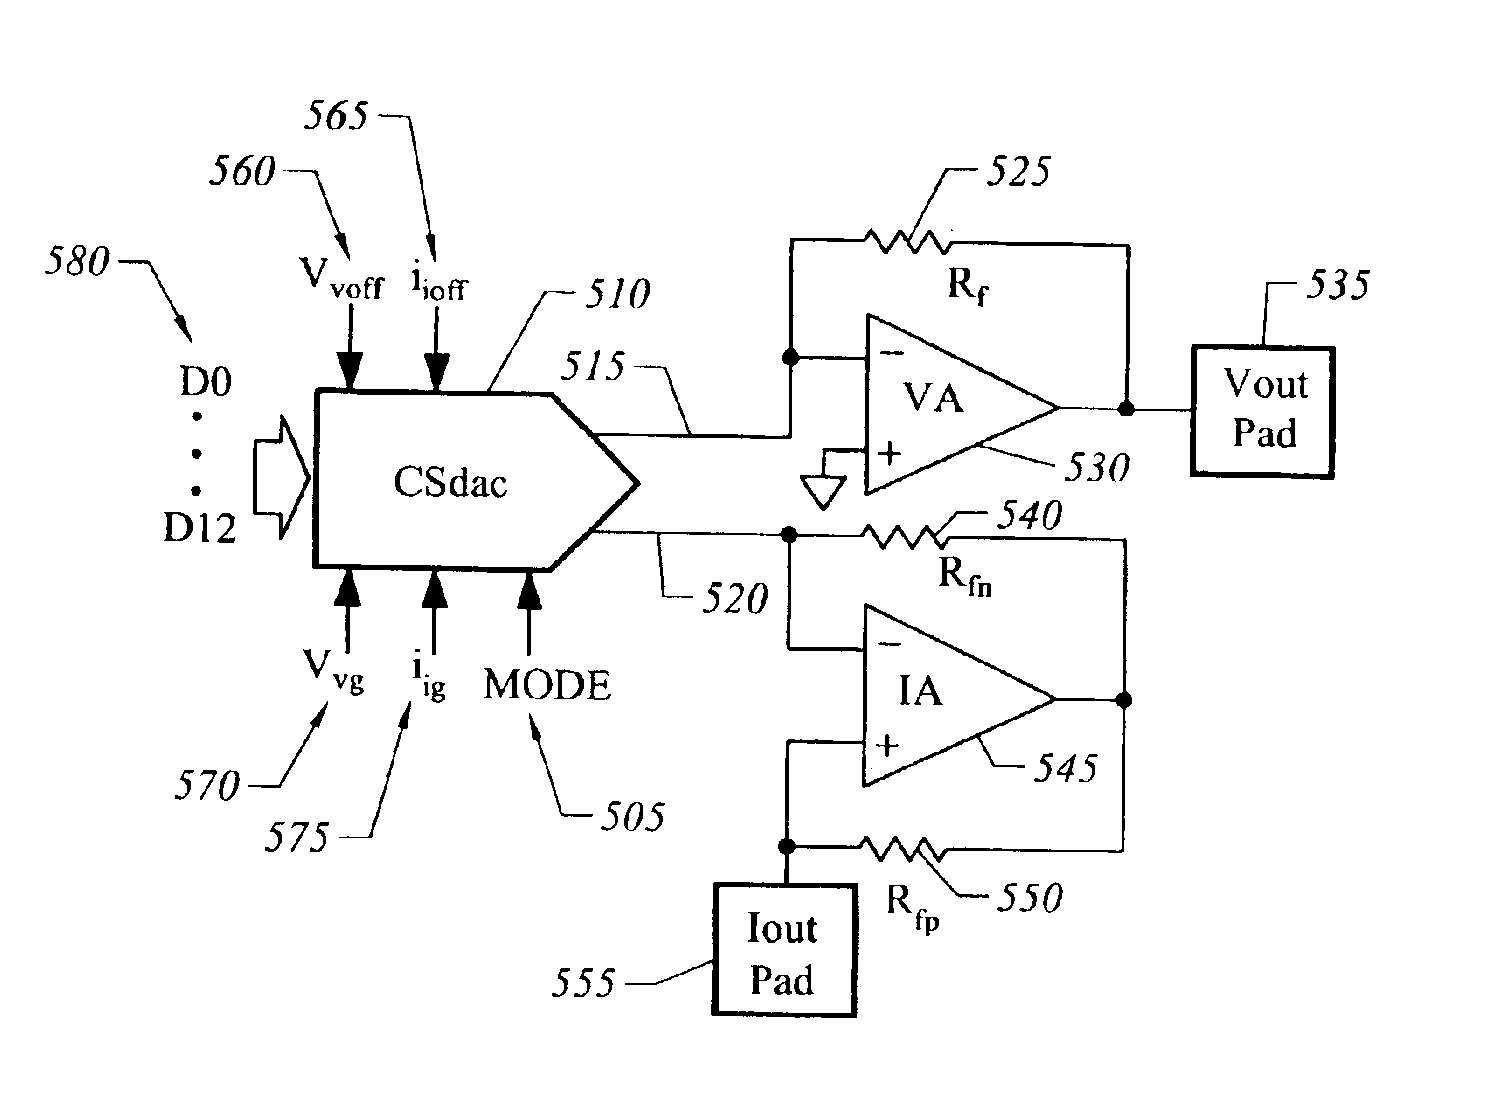 Digital adjustment of gain and offset for digital to analog converters